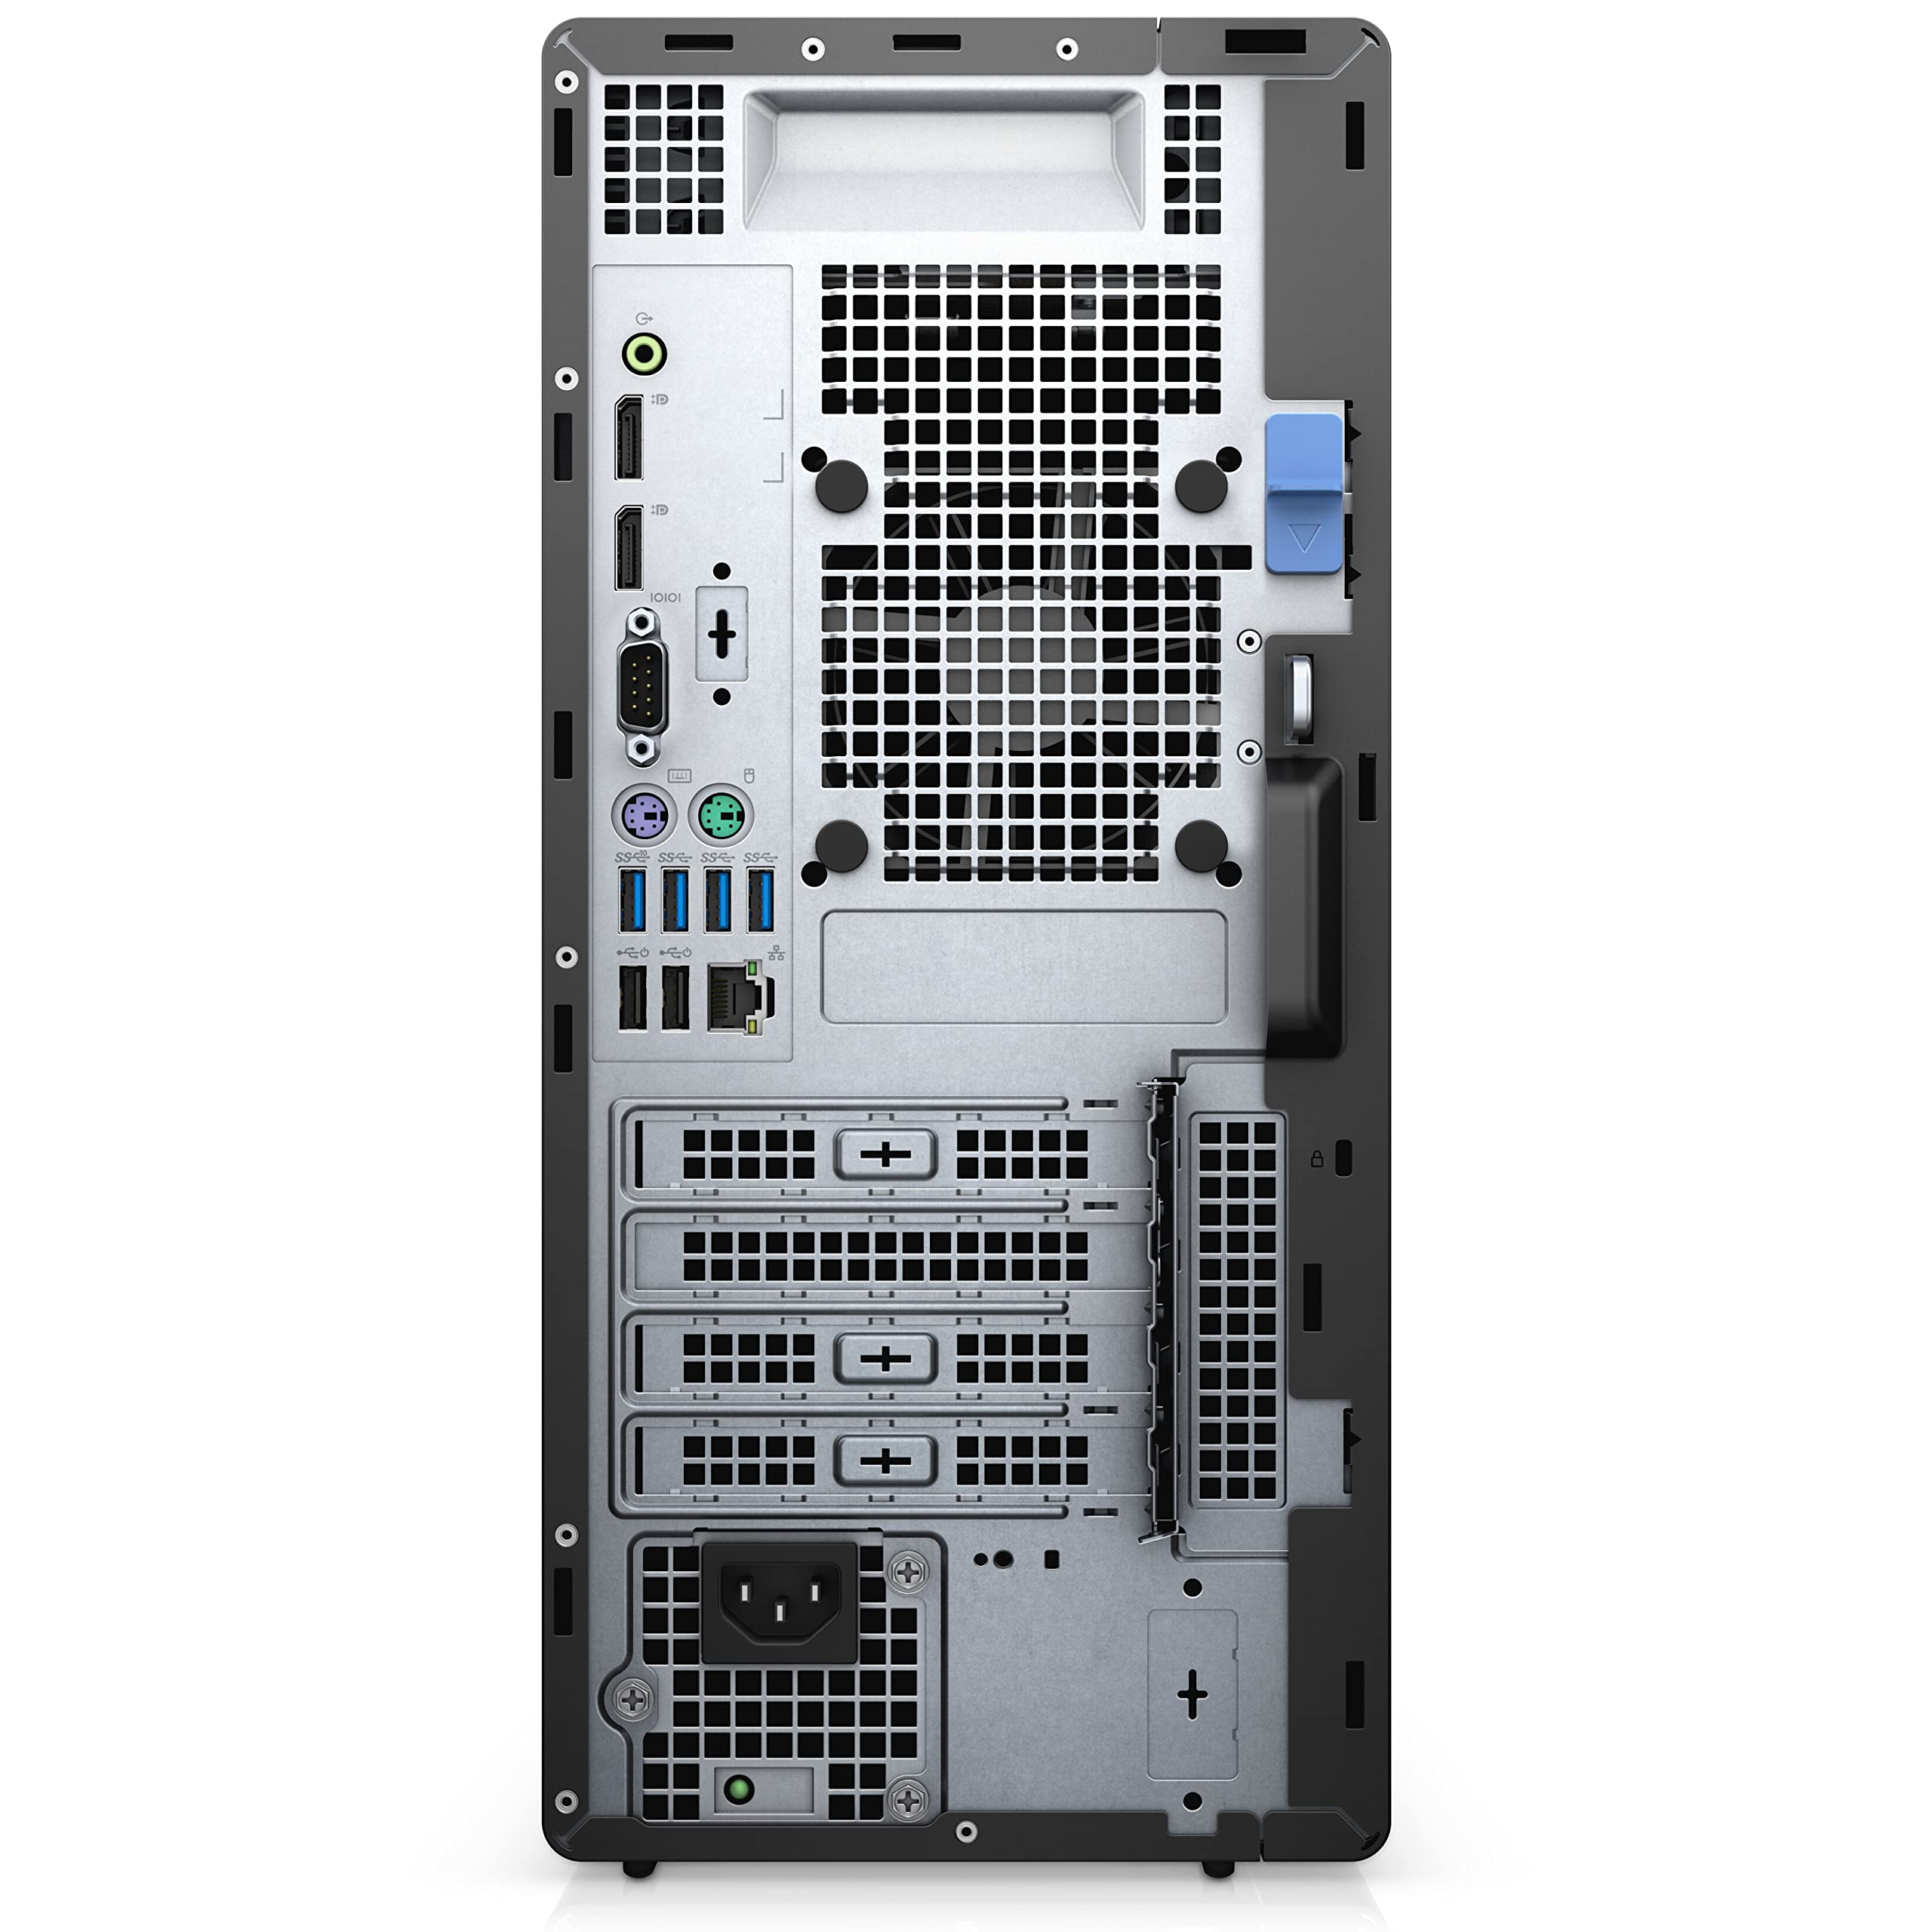 Dell OptiPlex 7090 Business Full Size Tower Desktop Computer, Intel Octa-Core i7-11700 Up to 4.9GHz, 64GB DDR4 RAM, 2TB PCIe SSD + 1TB HDD, DVDRW, WiFi Adapter, Ethernet, Type-C, Windows 11 Pro